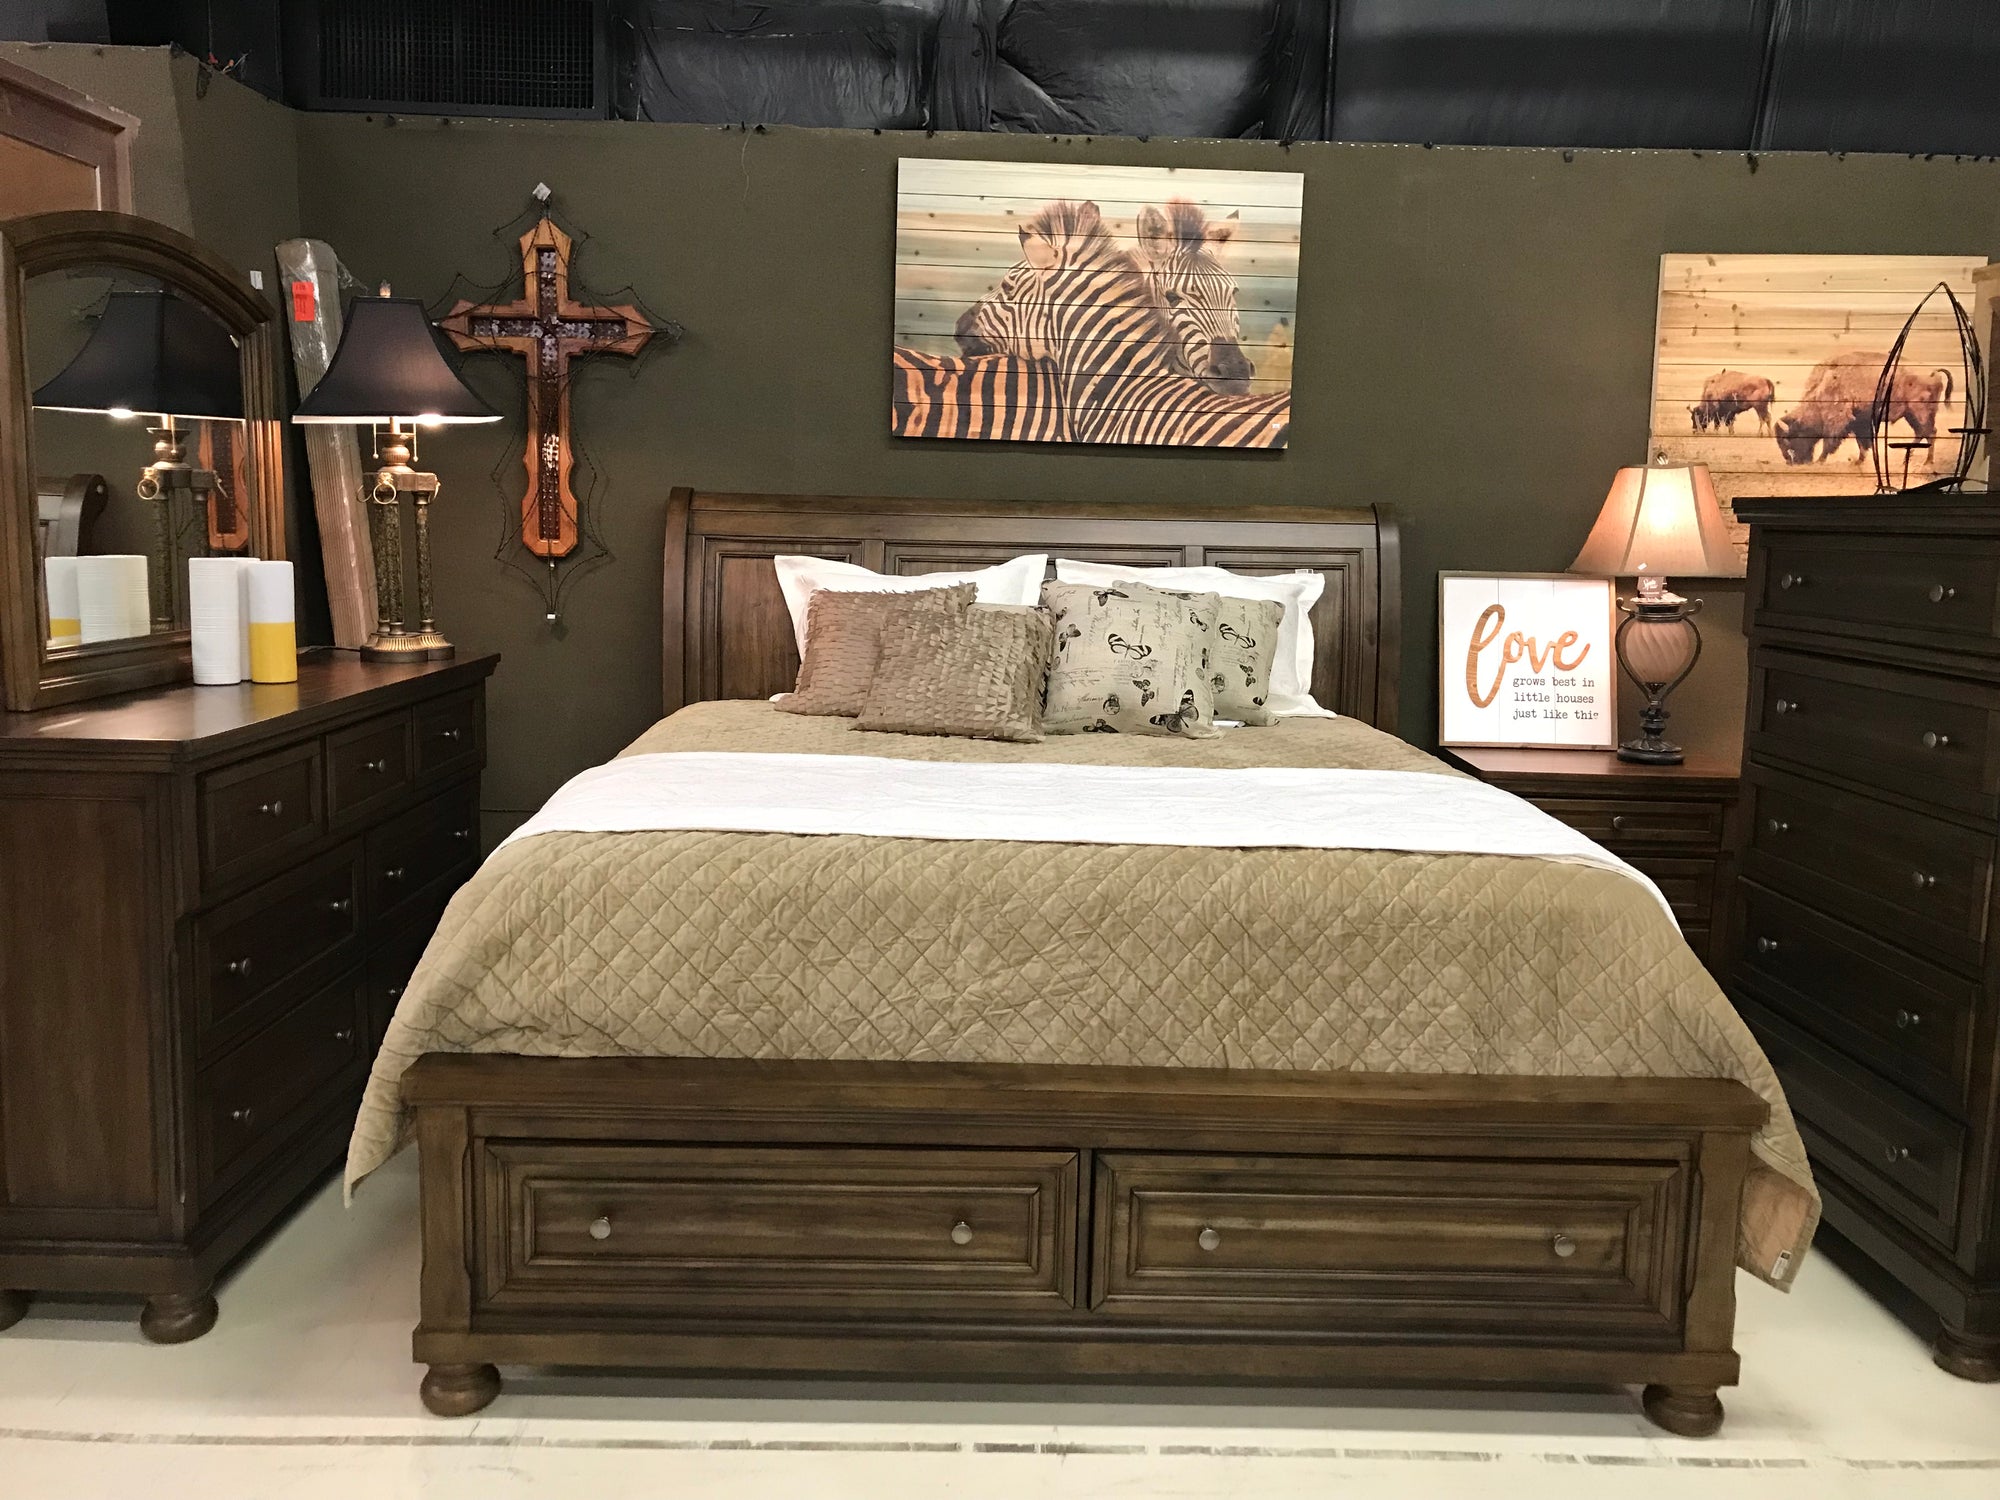 B820 FI-A Sleigh Bed with Storage Set